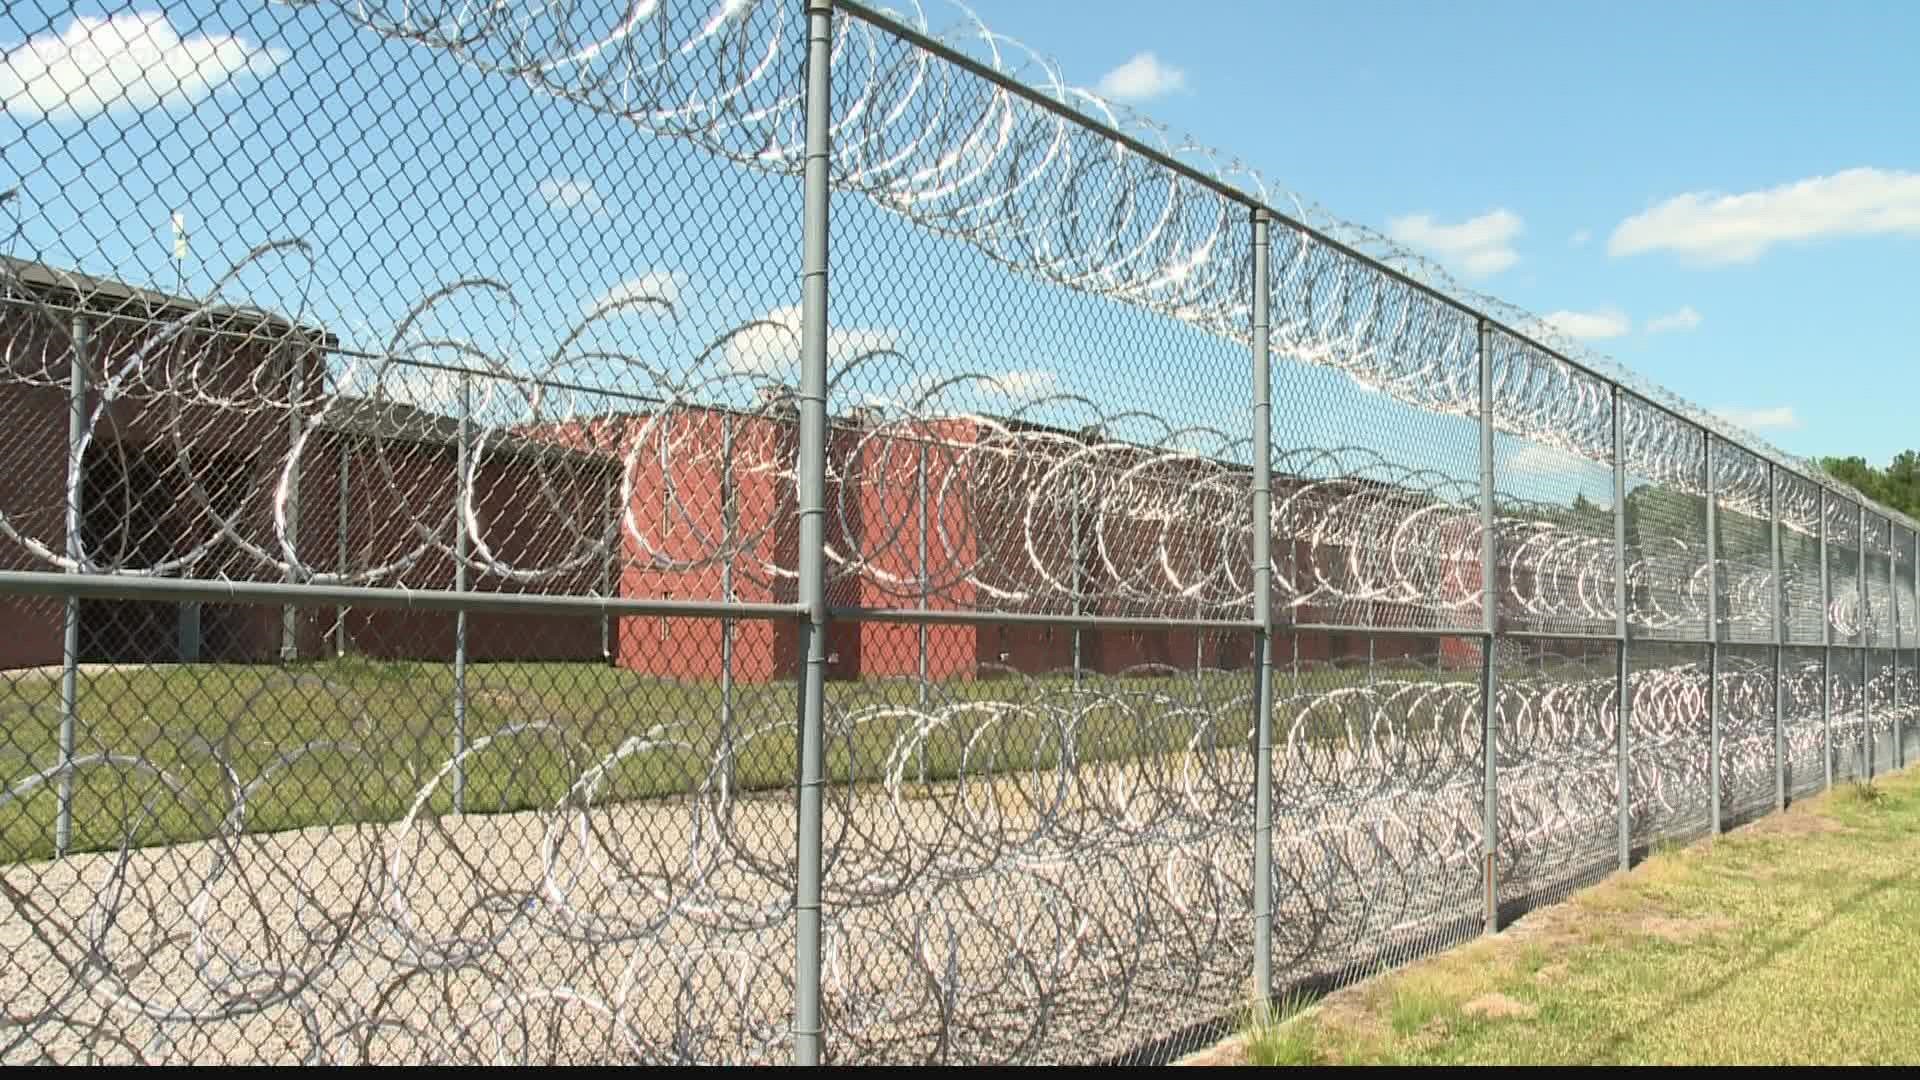 Video from inside the facility shows living conditions that some may call disturbing, including disconnected toilets and sinks and sewage floating in cells.